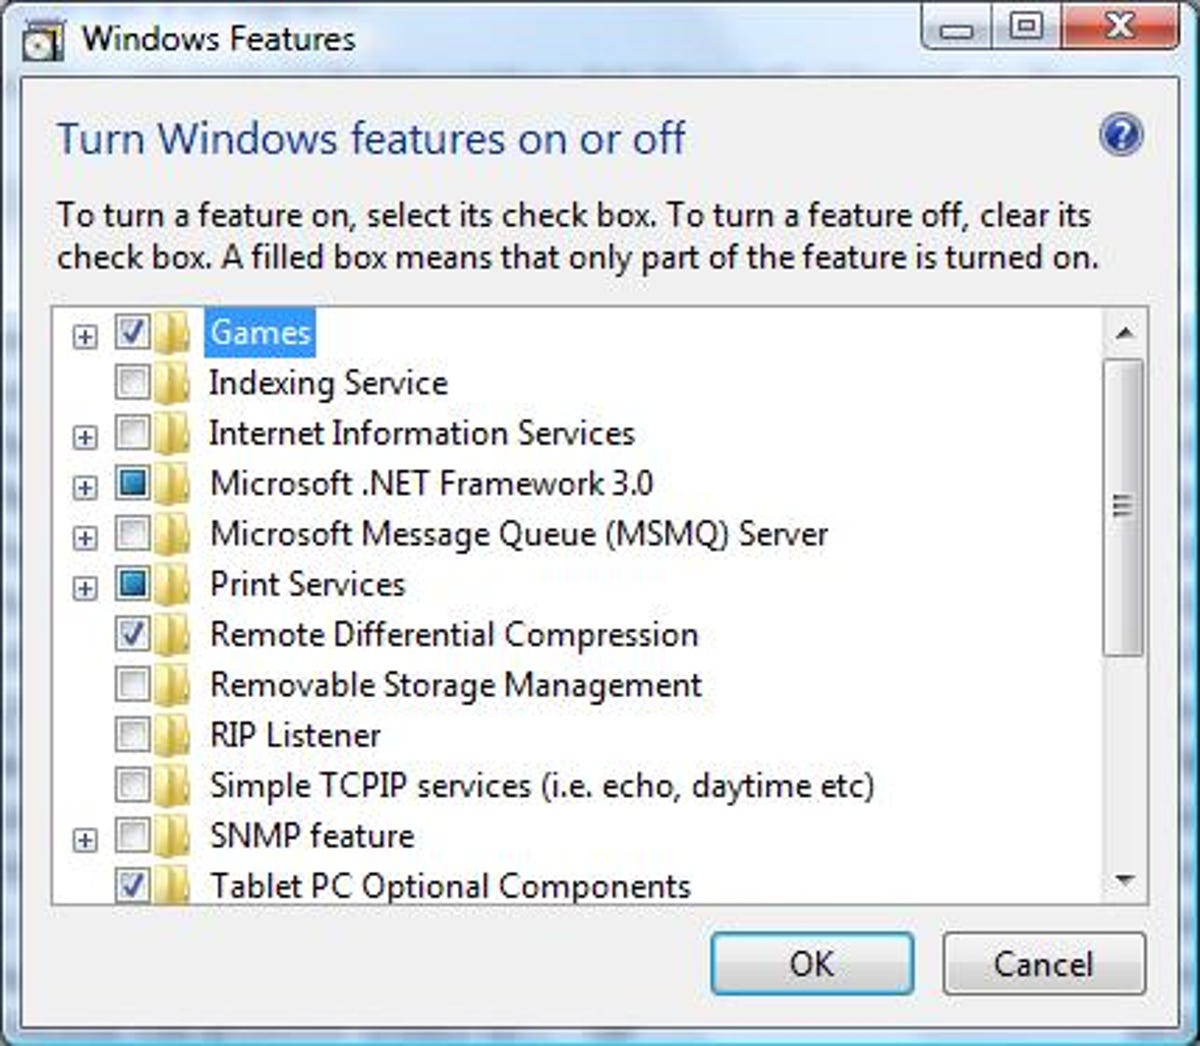 The Windows Features settings in Vista's Programs and Features applet